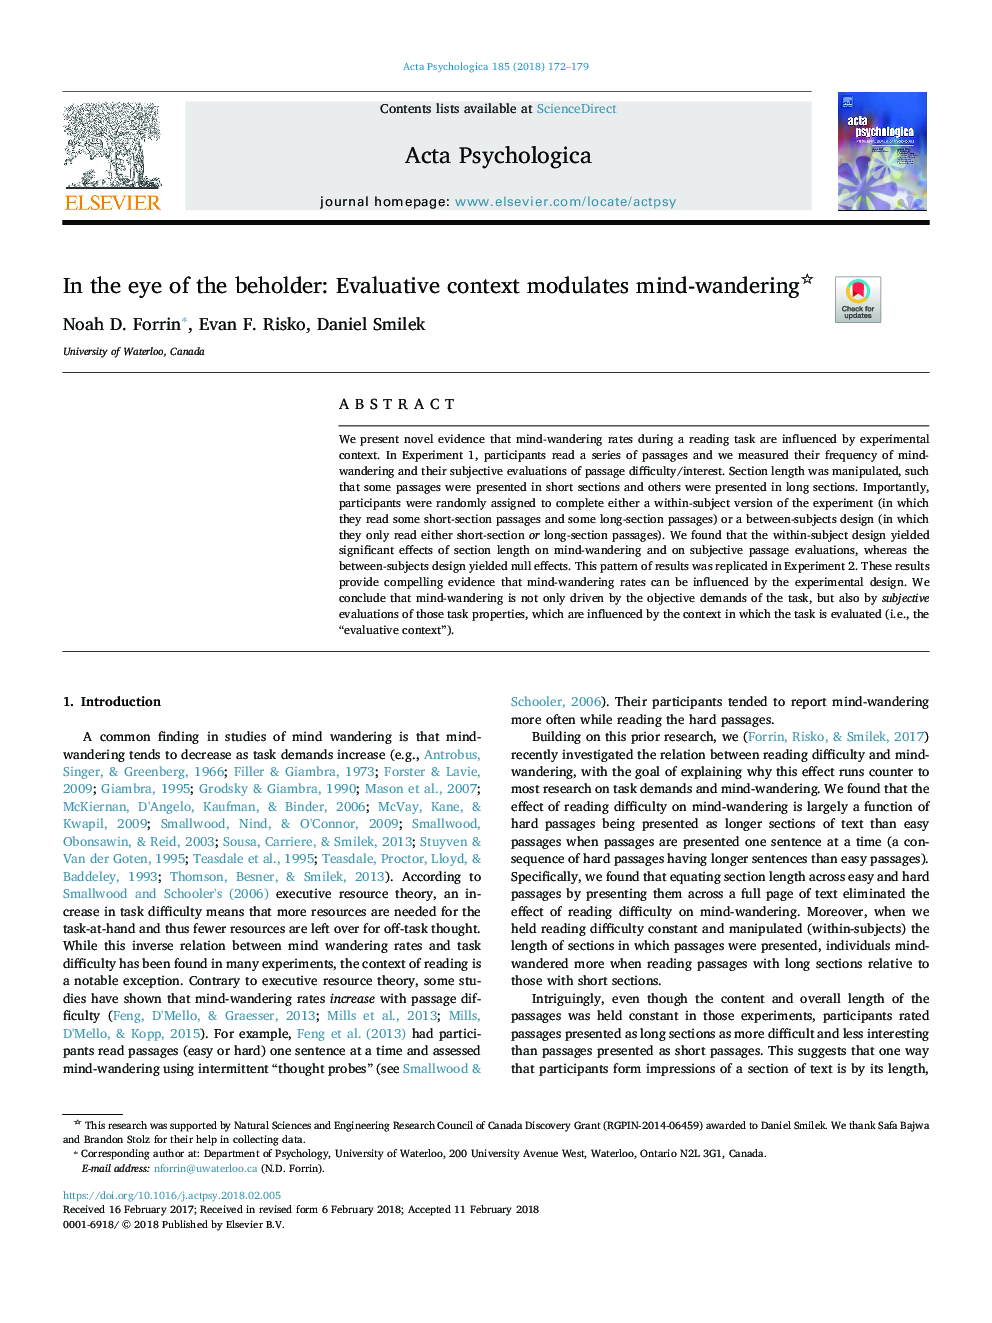 In the eye of the beholder: Evaluative context modulates mind-wandering